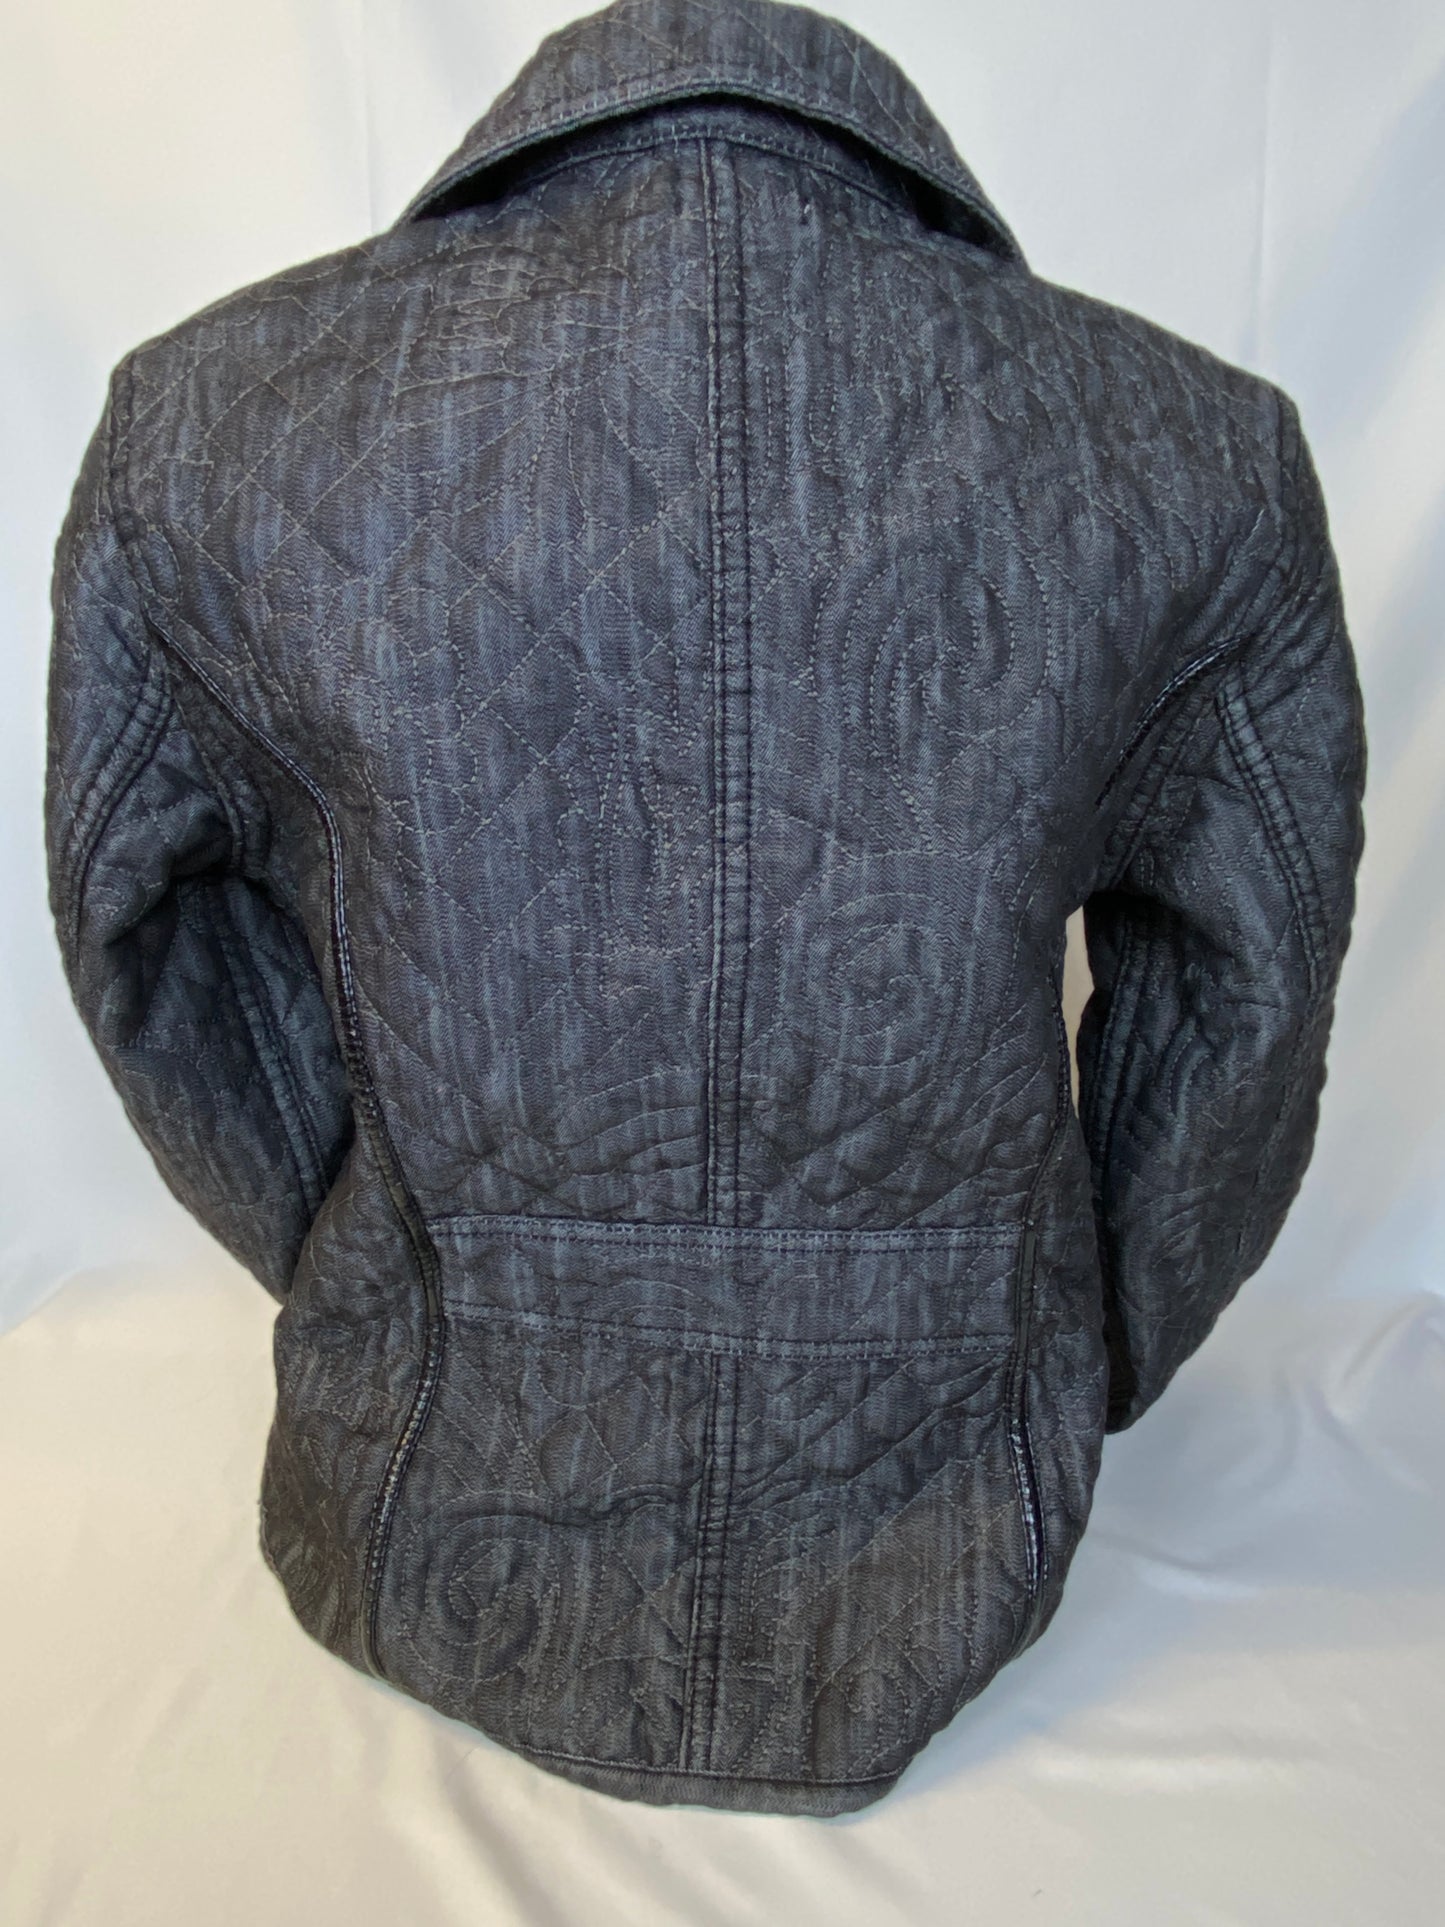 Chico's Size 0 Black Quilted Fitted Jacket